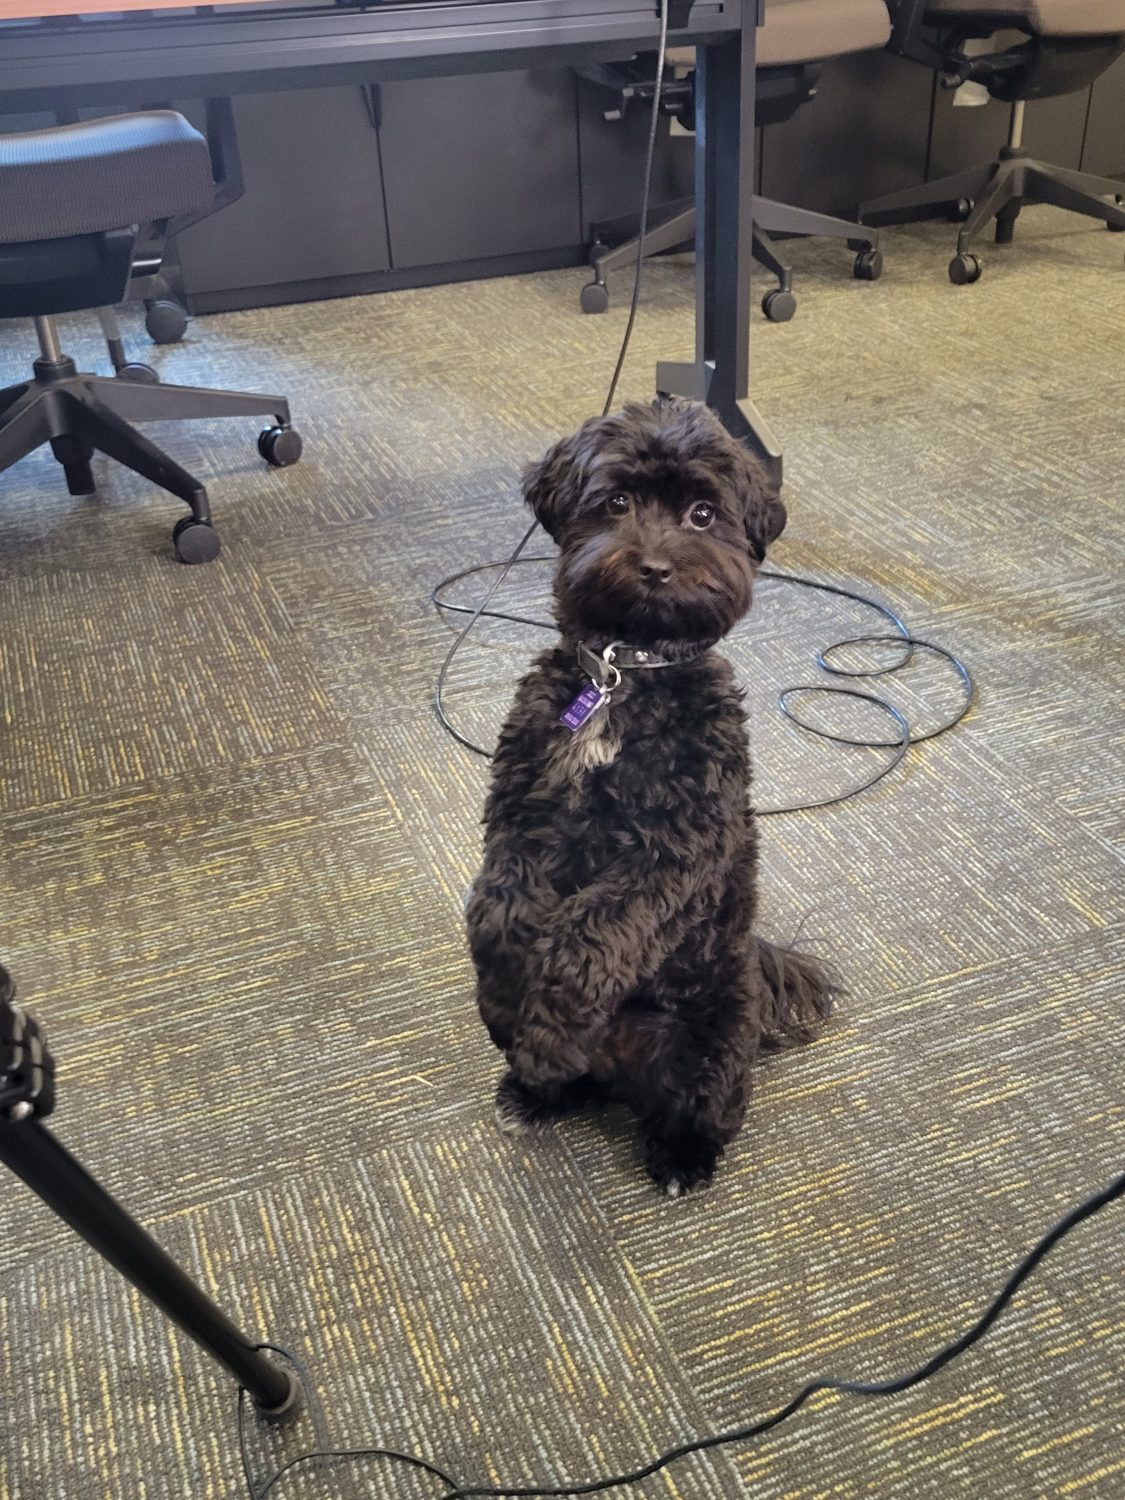 Toto, the Boss Dog of Skybox